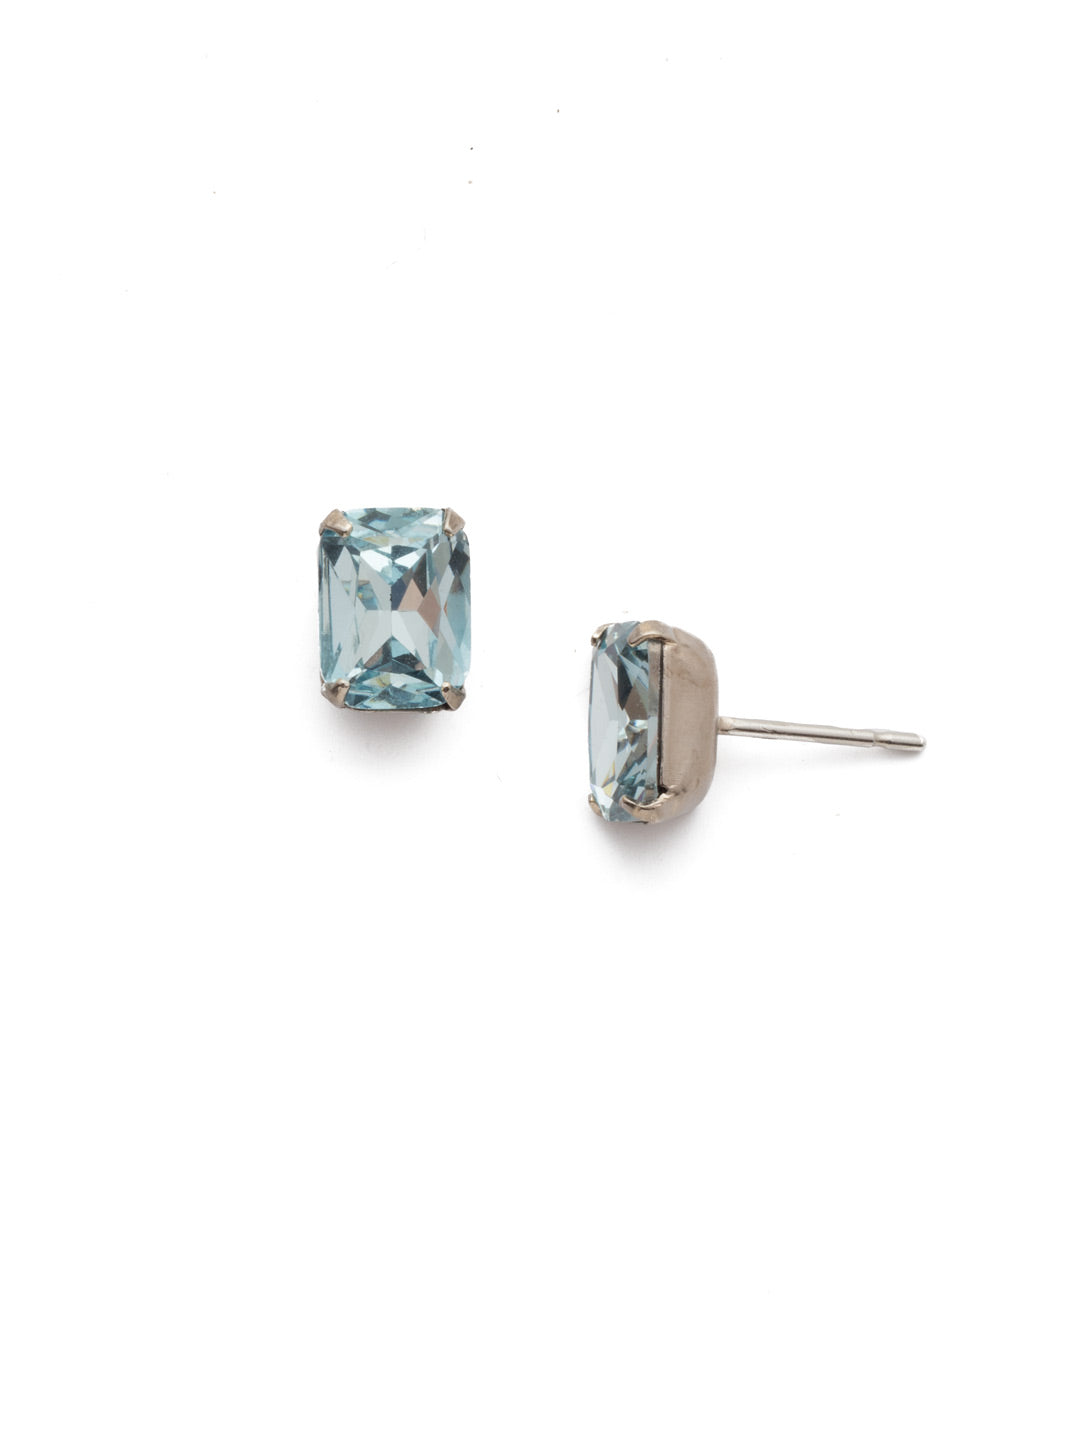 Mini Emerald Cut Stud Earrings - EBY42ASLAQ - <p>Simply sophisticated. The mini emerald cut stud earrings can be worn alone or paired with anything for an extra accent to any wardrobe. From Sorrelli's Light Aqua collection in our Antique Silver-tone finish.</p>